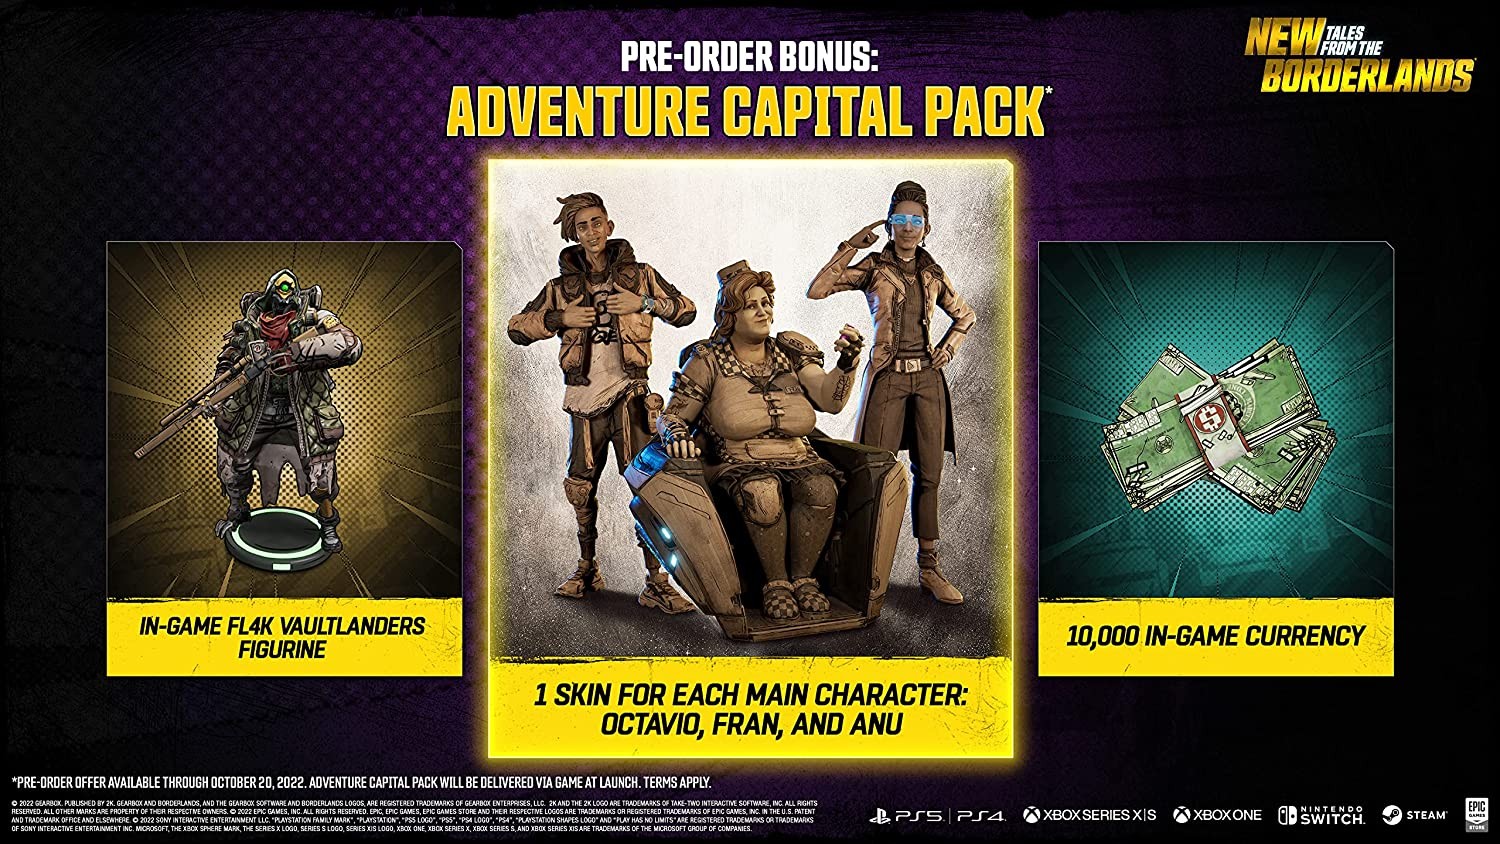 Tales From The Borderlands 2 Deluxe Edition